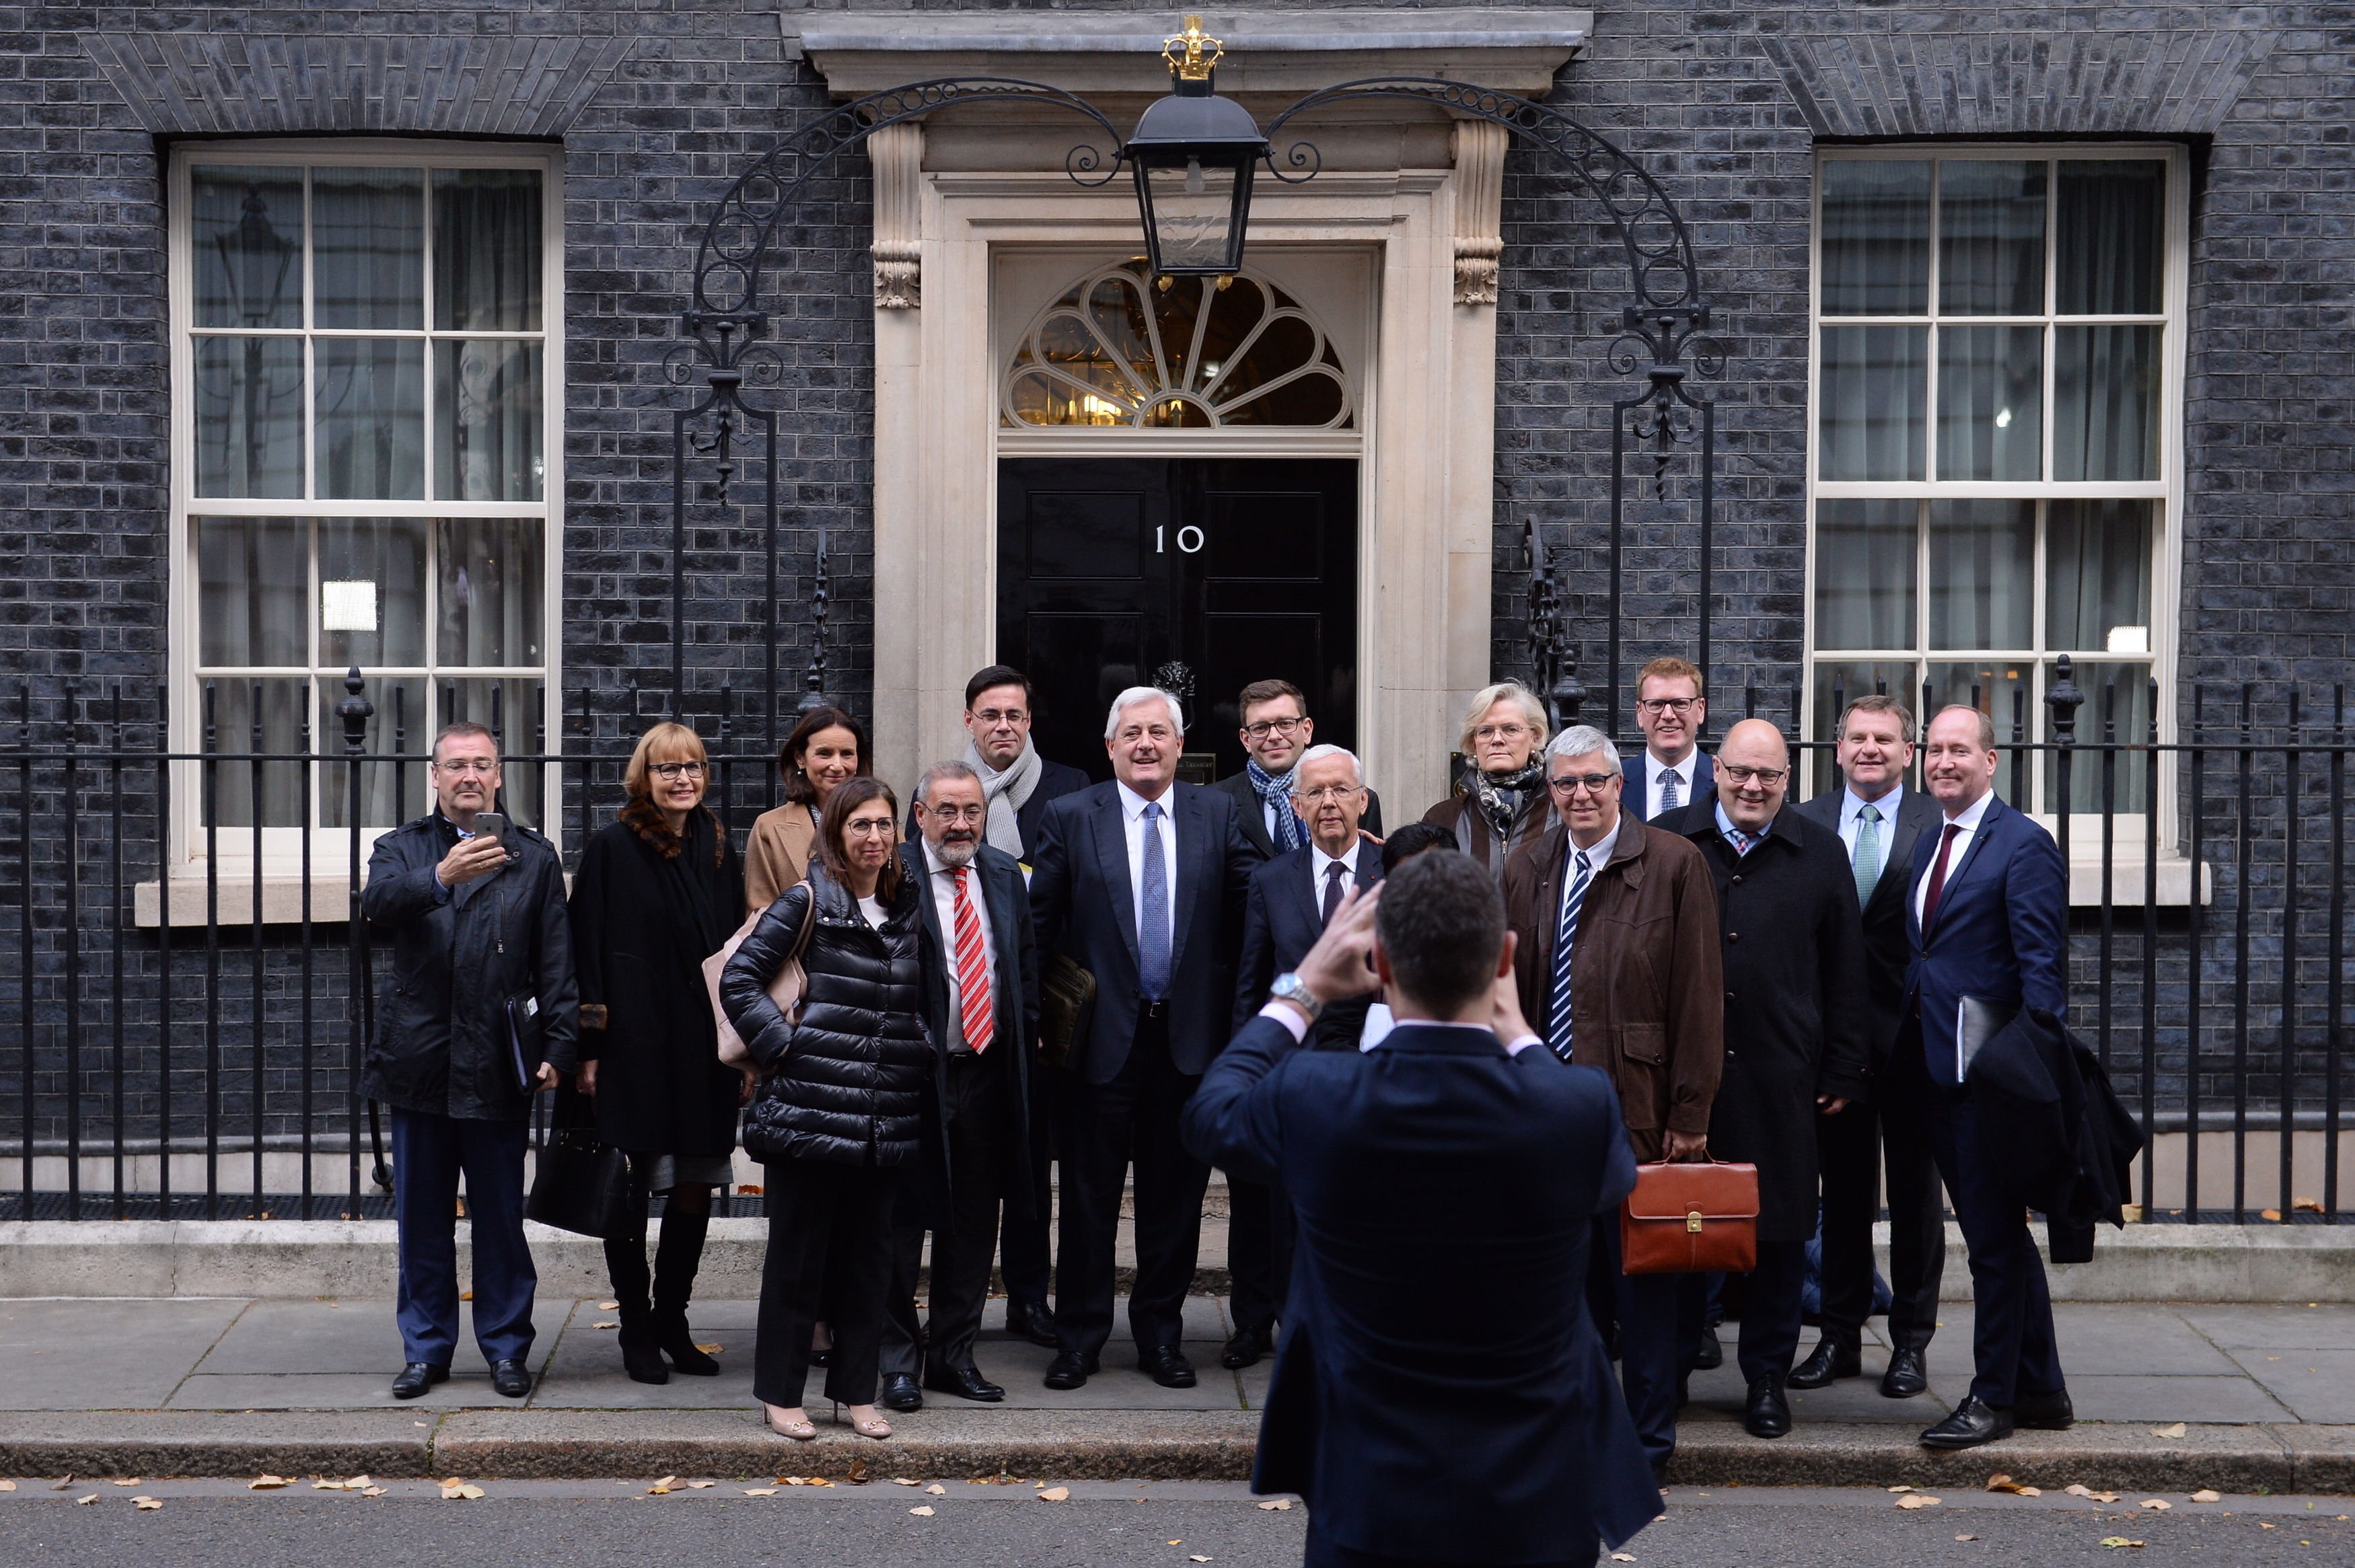 <i>Business leaders from Europe and the UK pose for a group photo as they leave 10 Downing Street, London, after a meeting with Prime Minister Theresa May to discuss the future of UK-EU trade post-Brexit.</i>